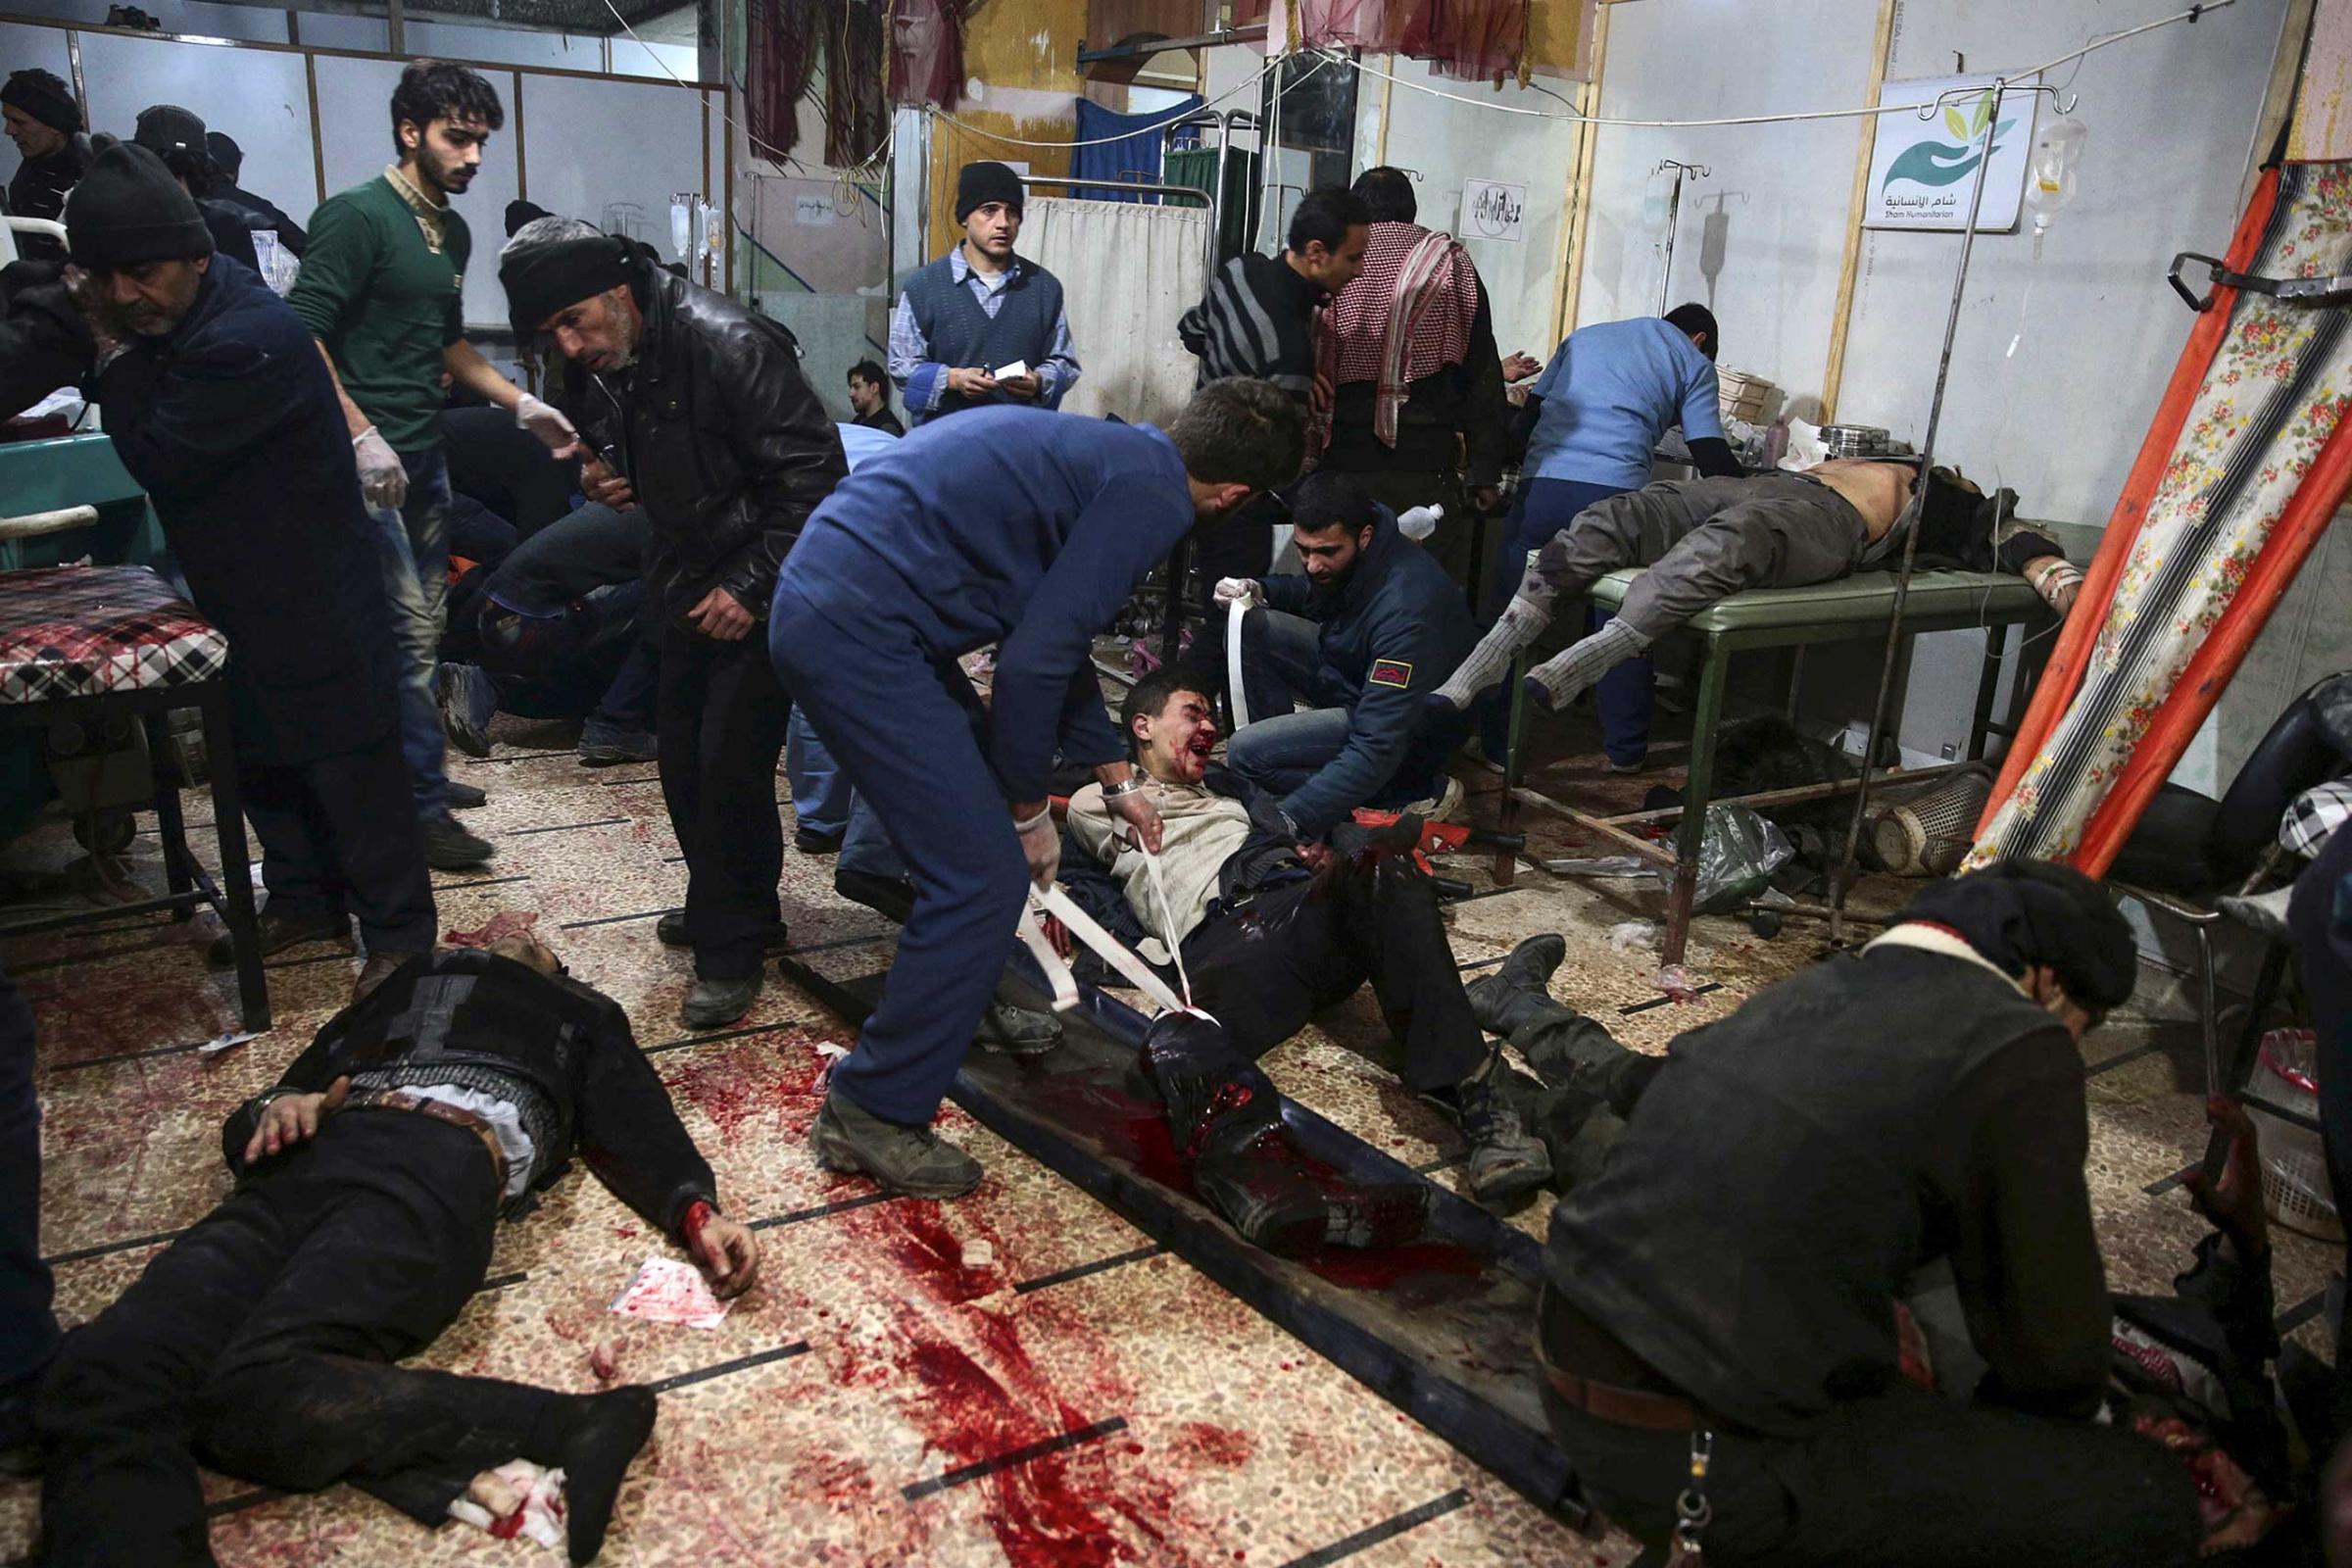 Medics treat injured people inside a field hospital after what activists said were air and missile strikes in the Douma neighborhood of Damascus, Syria December 13, 2015.